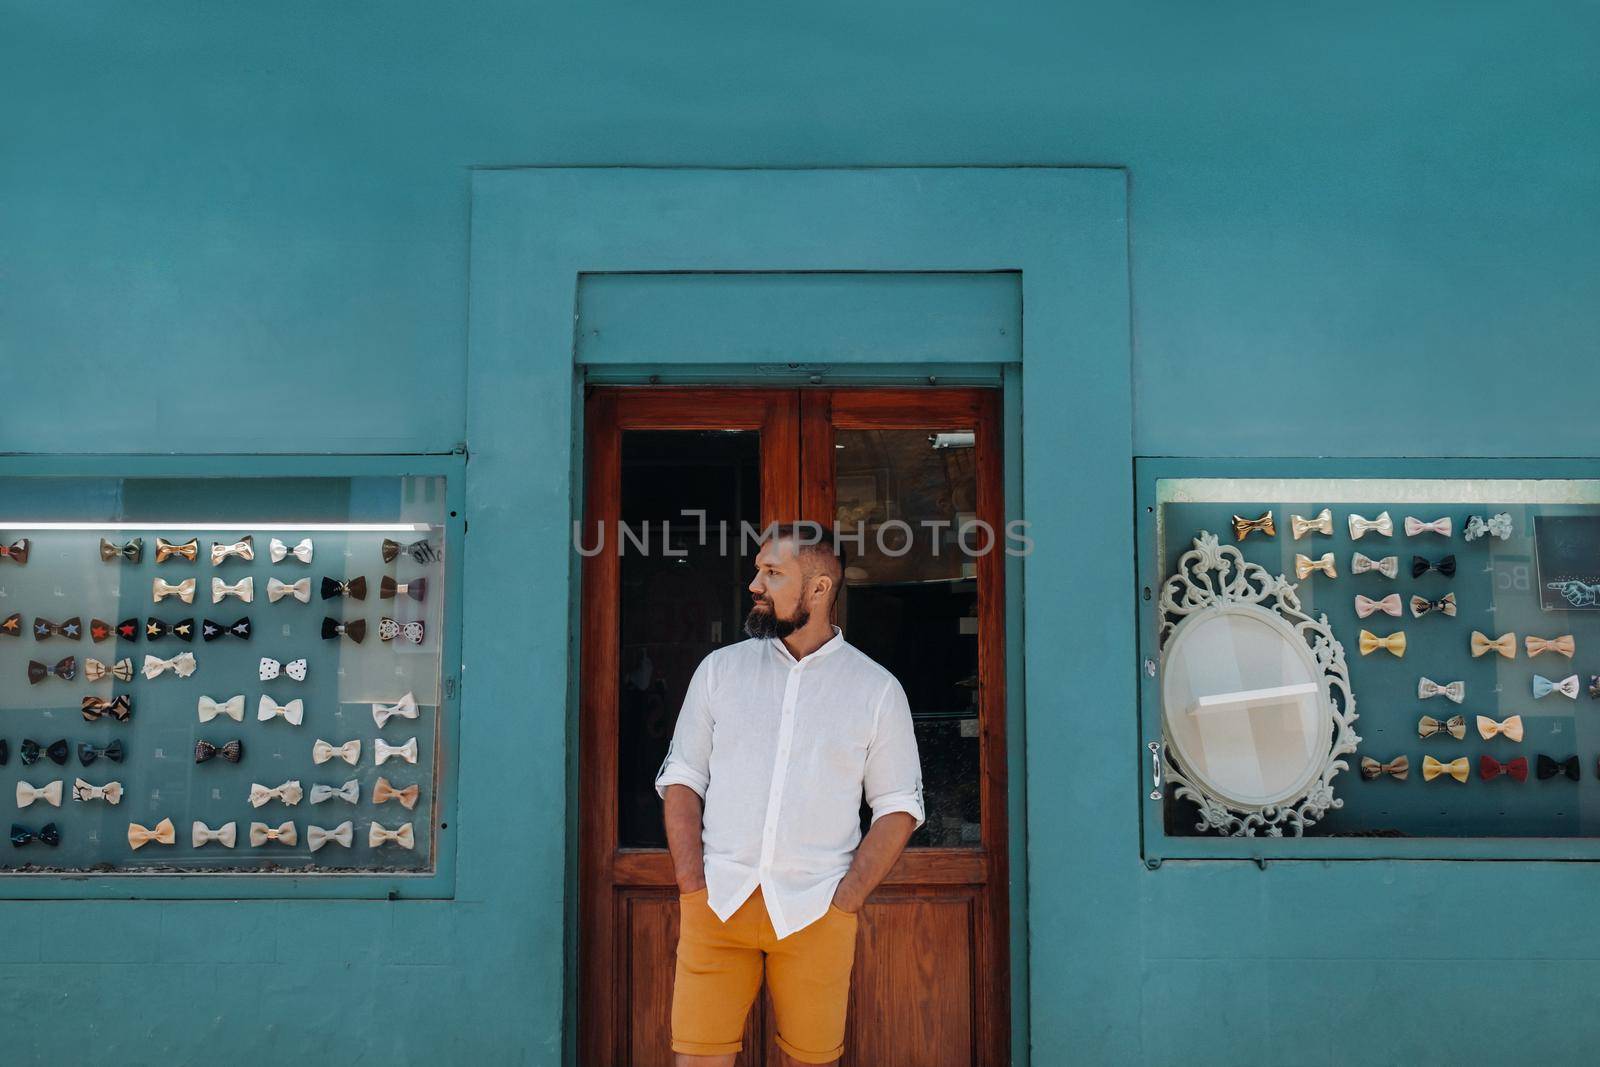 A man in the Old town of La Laguna on the island of Tenerife on a Sunny day against the background of a counter with butterflies on costumes.Butterflies for men's costumes in the Canary Islands.Spain